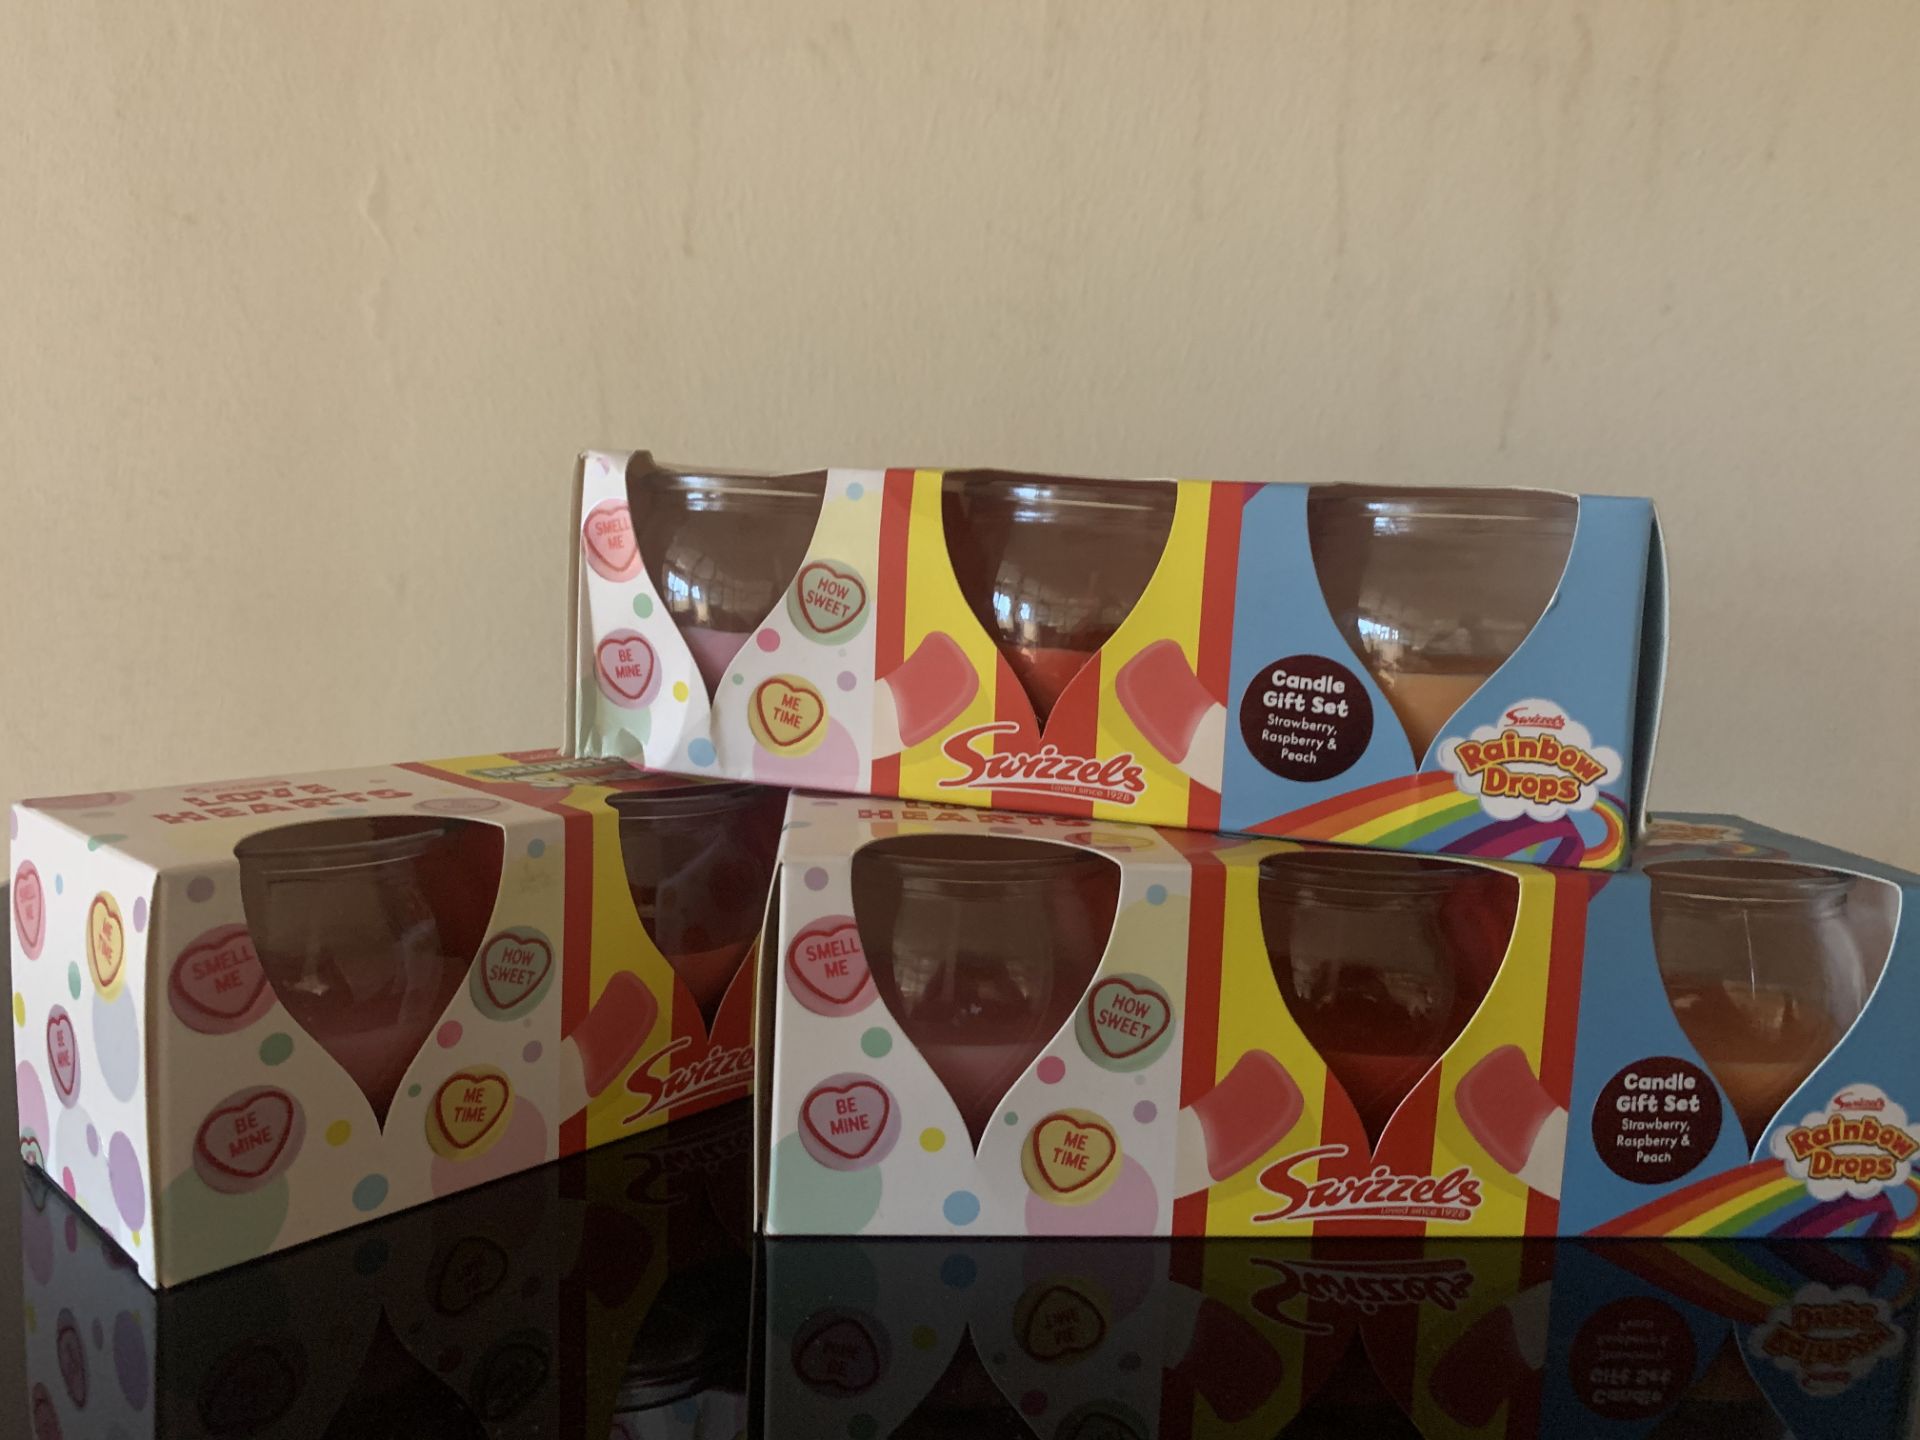 12 X BRAND NEW SWIZZLES 3 JAR CANDLE SETS INCLUDING LOVE HEARTS, DRUMSTICK AND RAINBOW DROPS